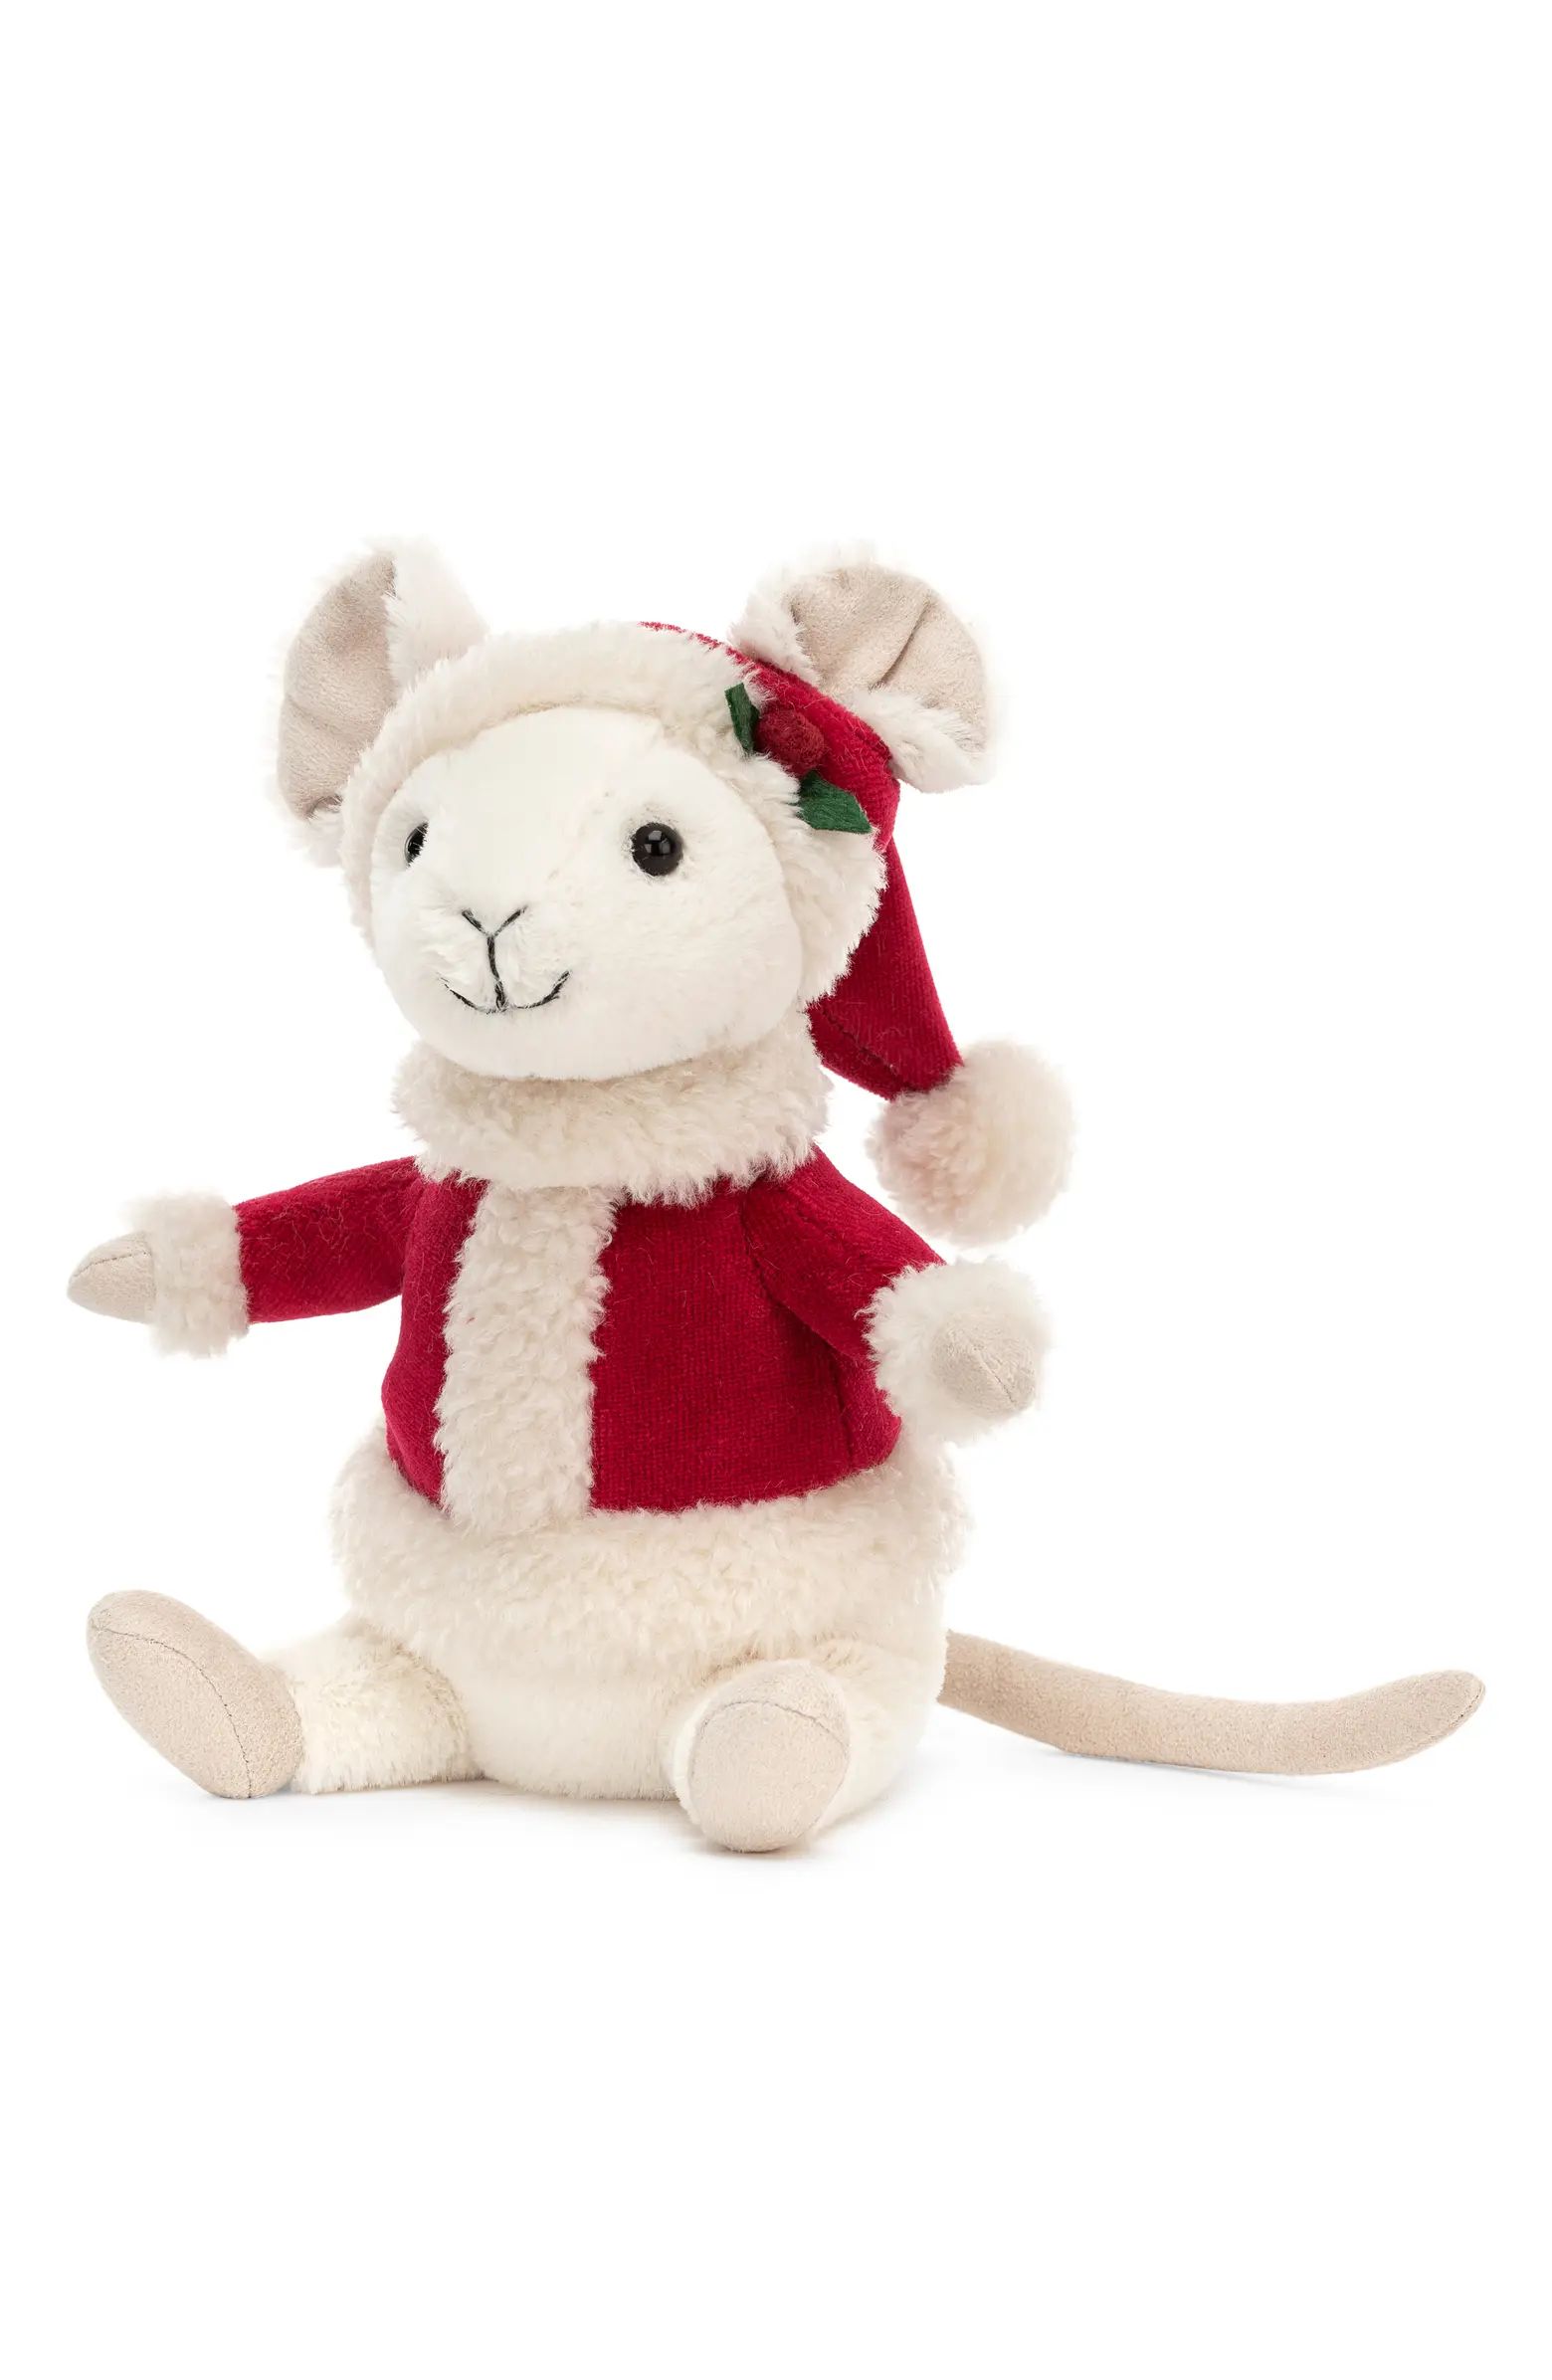 Merry Mouse Stuffed Animal | Nordstrom